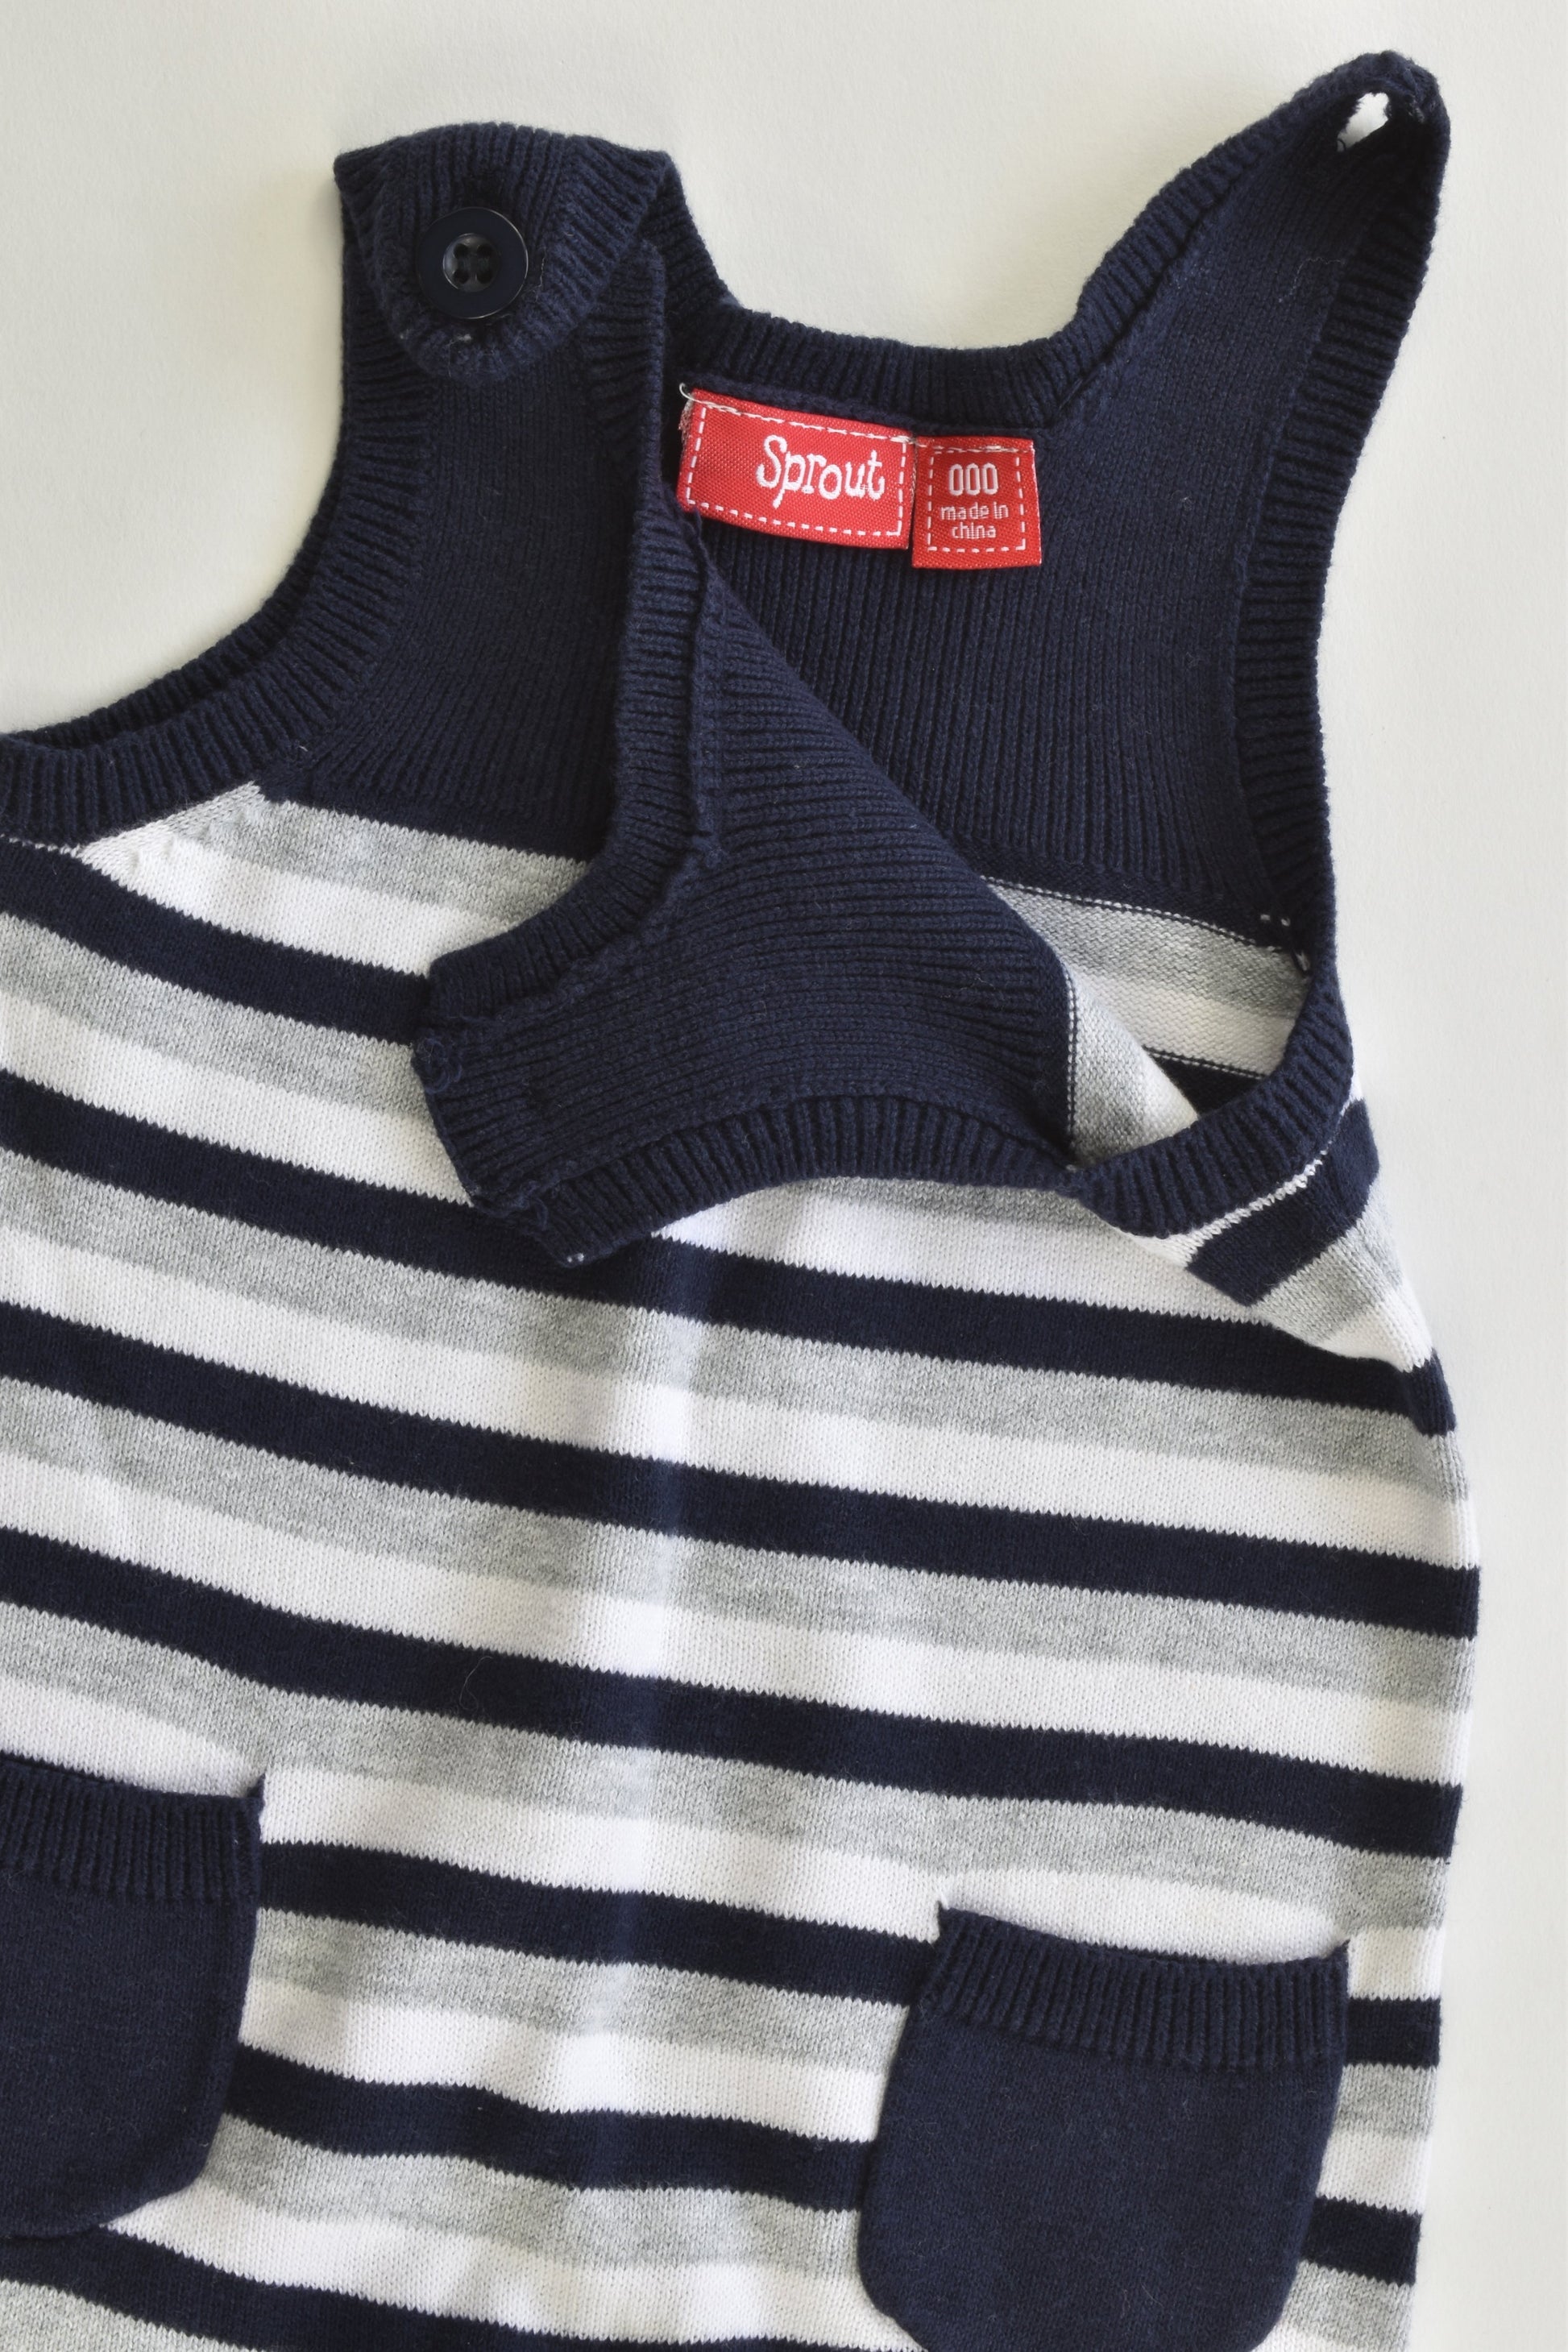 Sprout Size 000 Knitted Striped Overalls